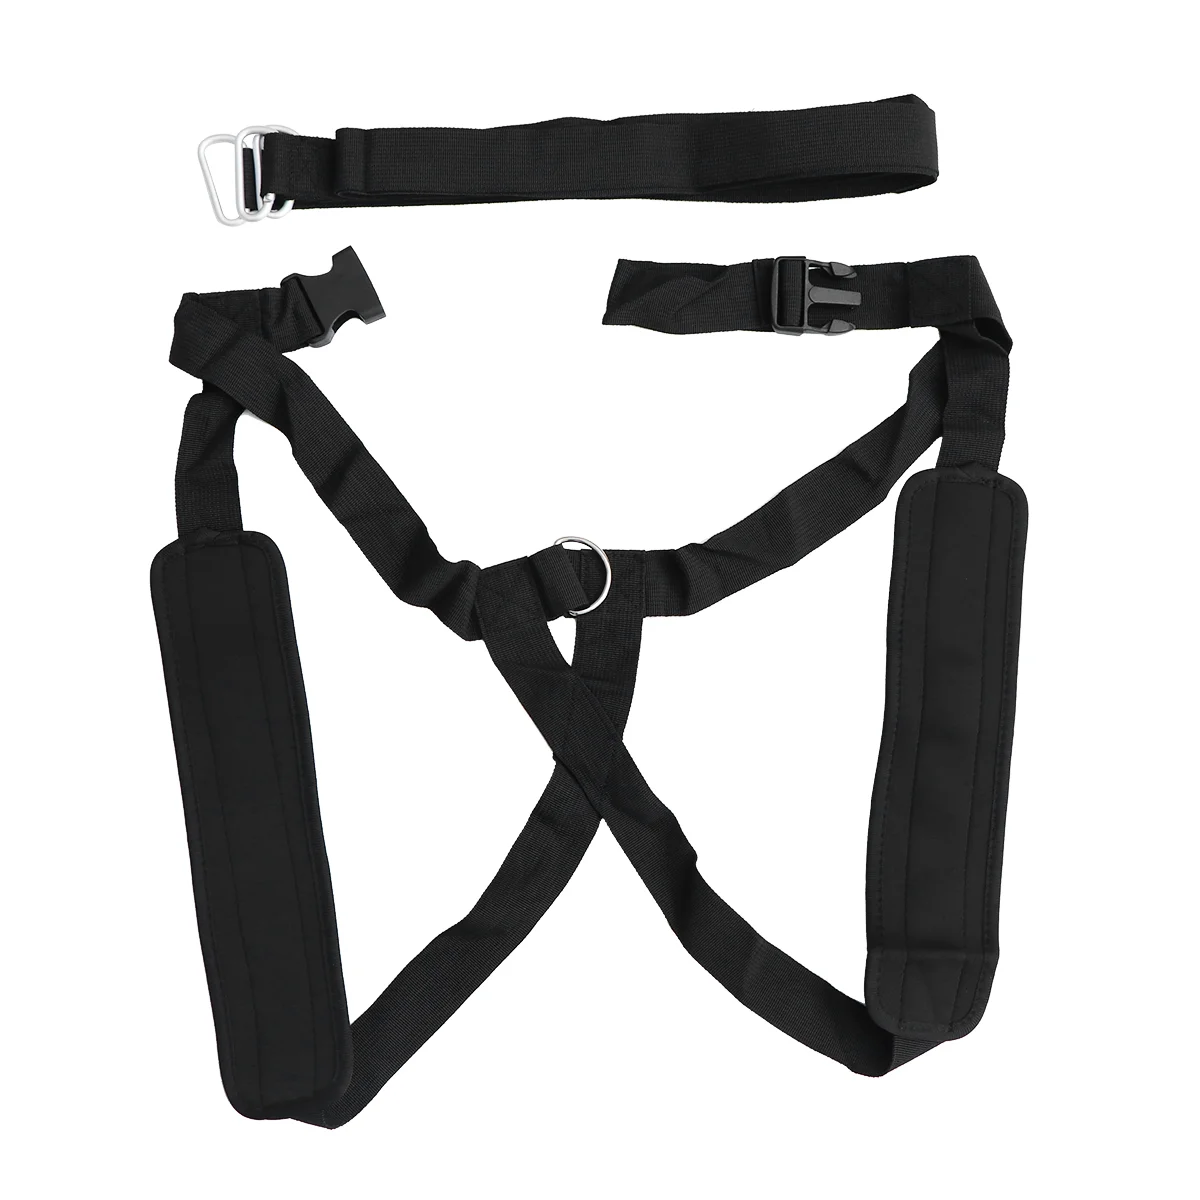 

Belt Resistance Harness Sled Pulling Training Weight Equipment Workout Tire Strap Bearing Belts Pull Trainer Power Bands Running